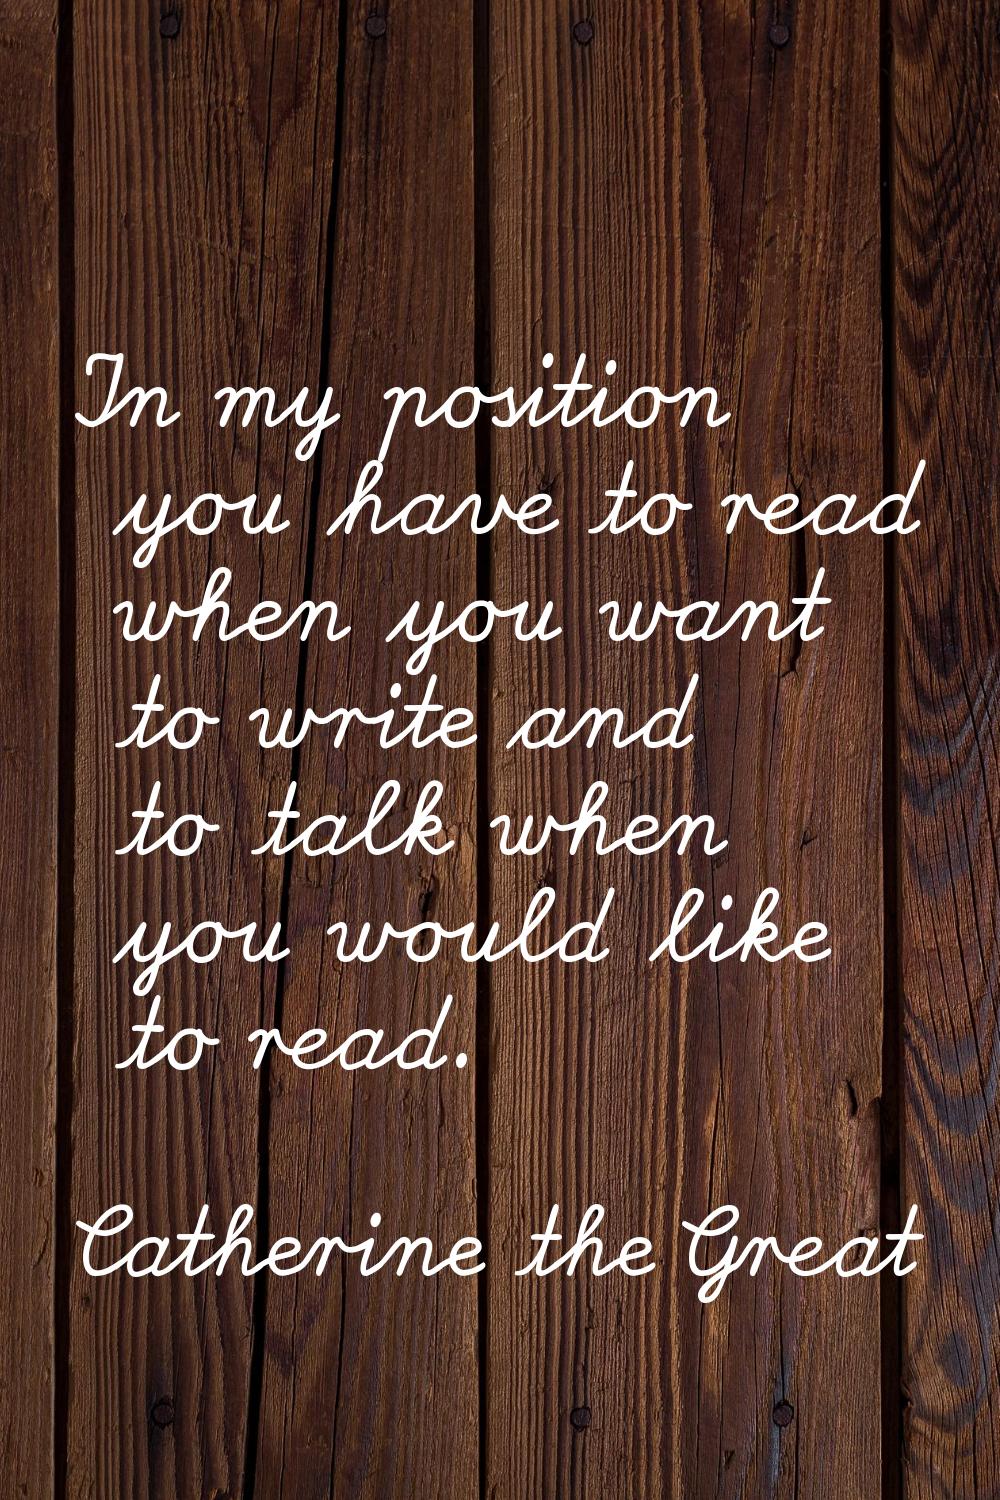 In my position you have to read when you want to write and to talk when you would like to read.